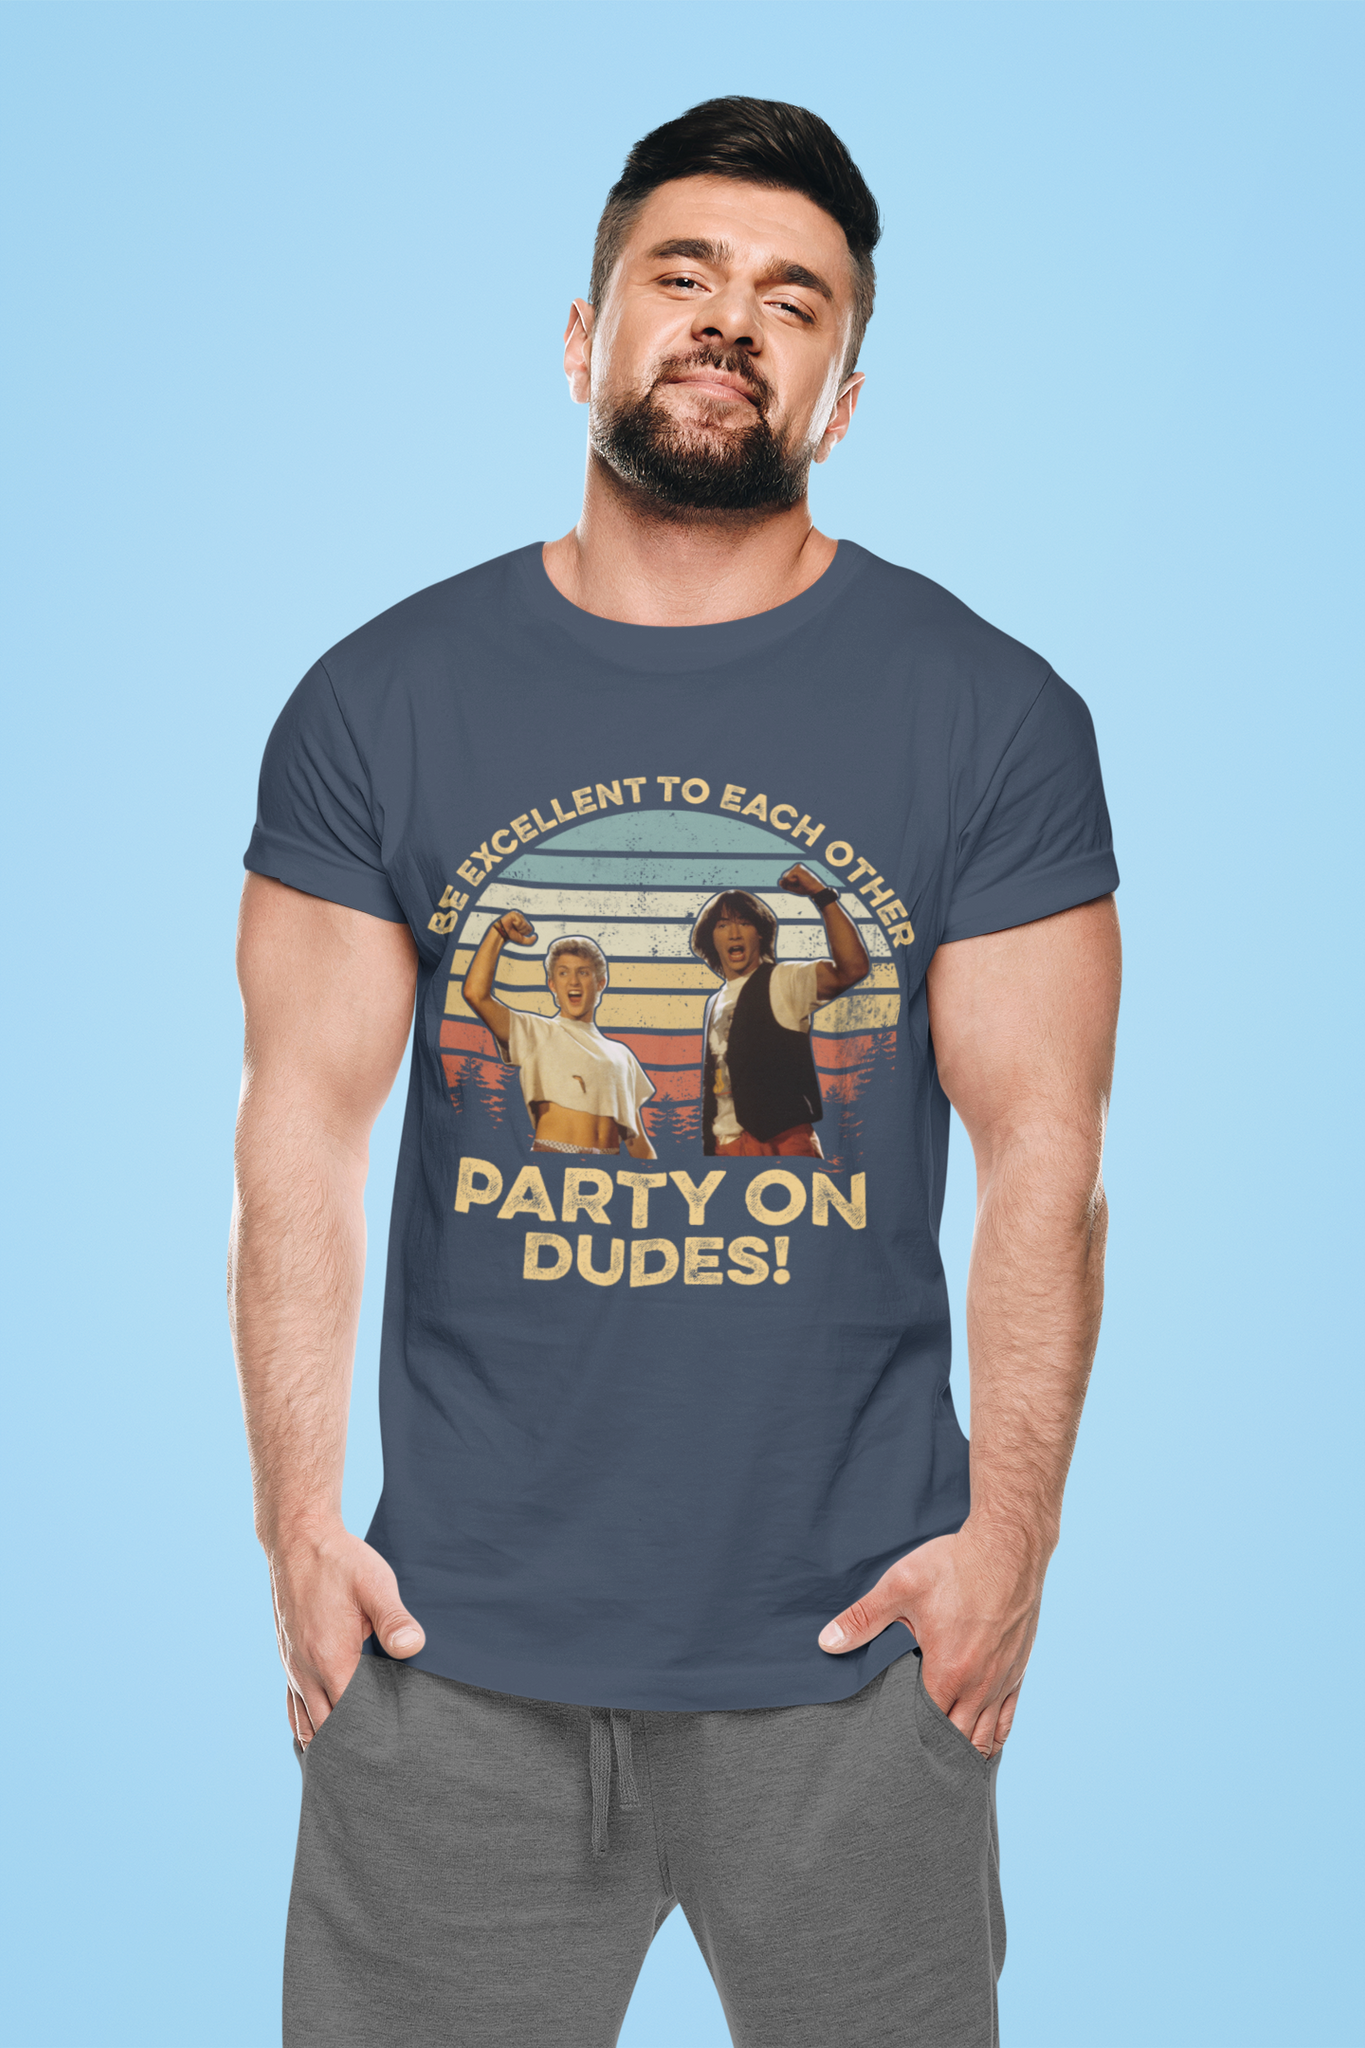 Bill And Teds Excellent Adventure Vintage Tshirt, Bill Ted Shirt, Be Excellent To Each Other Shirt, Party On Dudes Tshirt